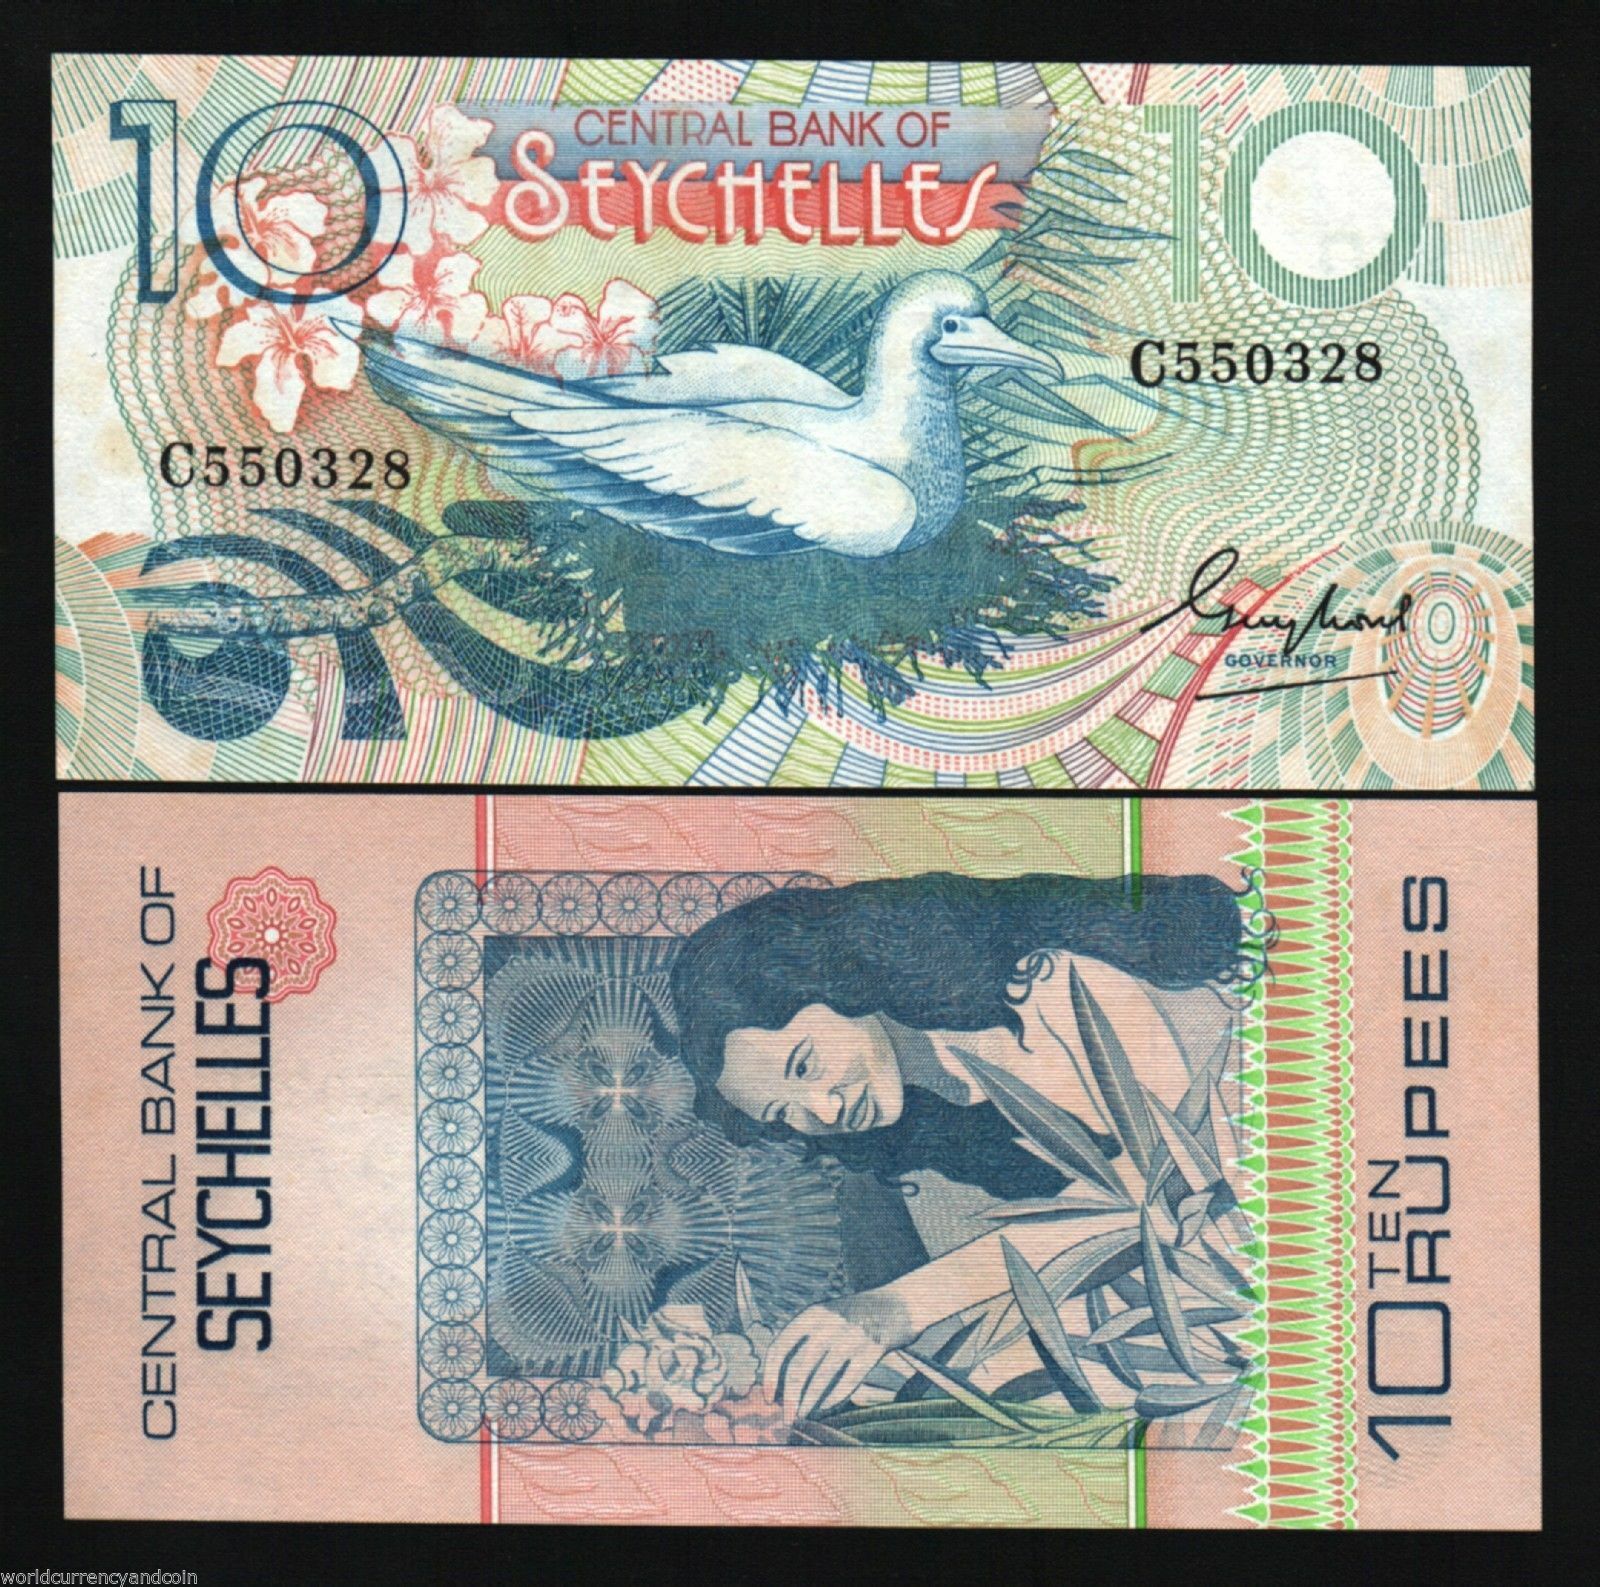 Seychelles 10 Rupees P-28 1983 Red Footed Bobby Bird Unc Africa Animal Bank Note